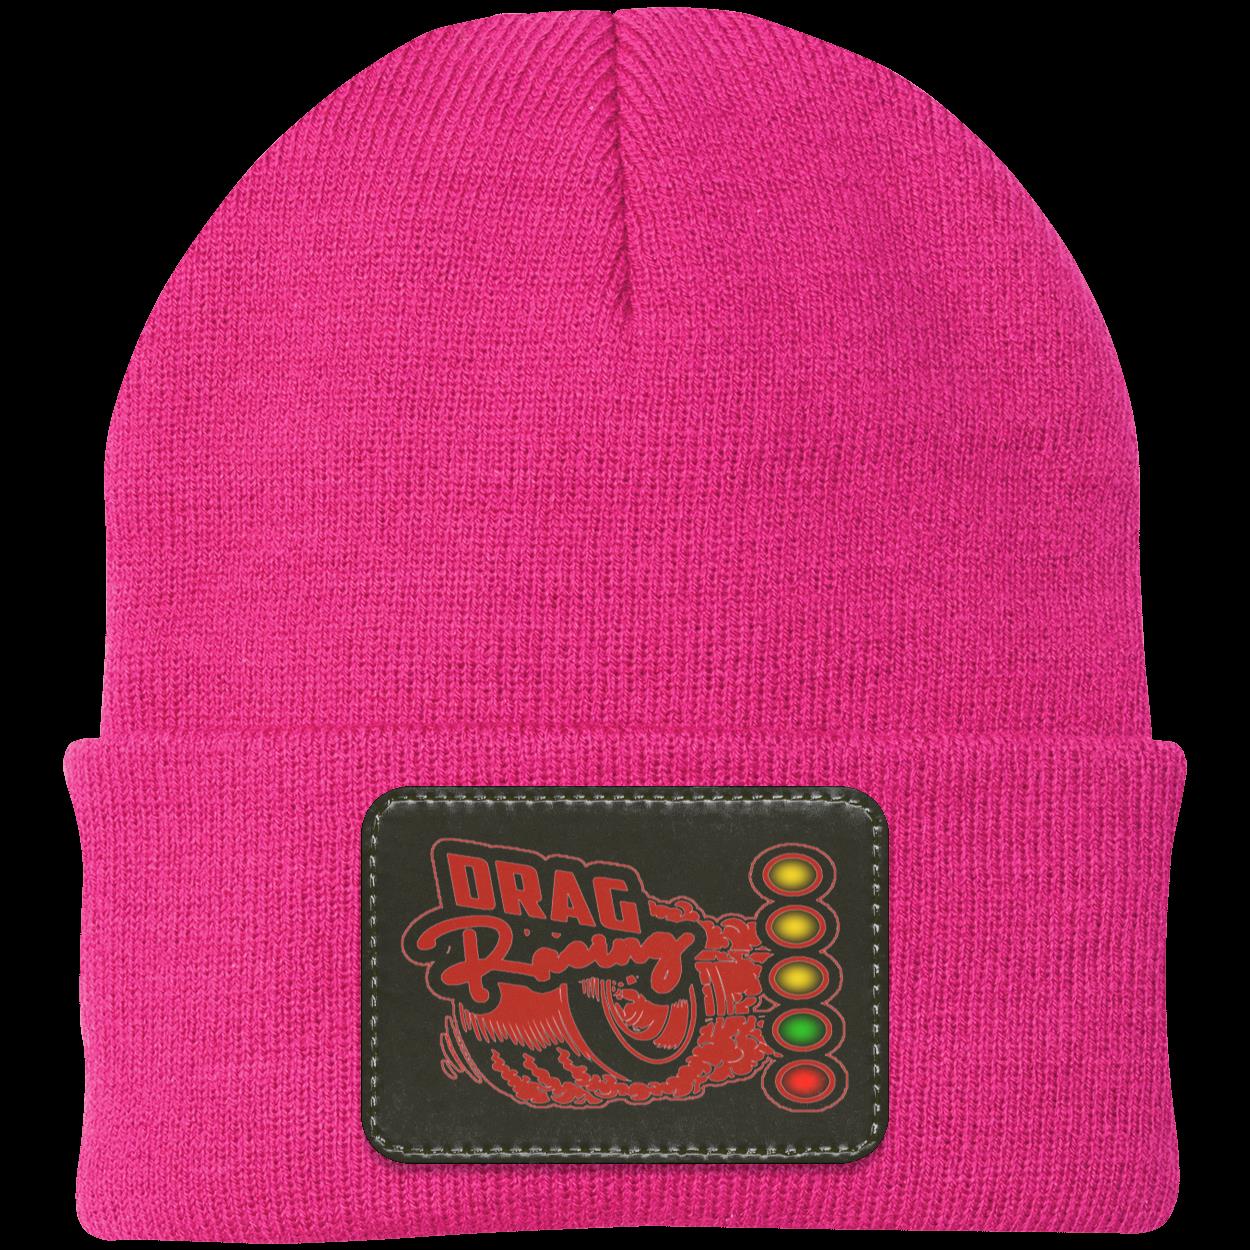 Drag Racing Patched Knit Cap V4